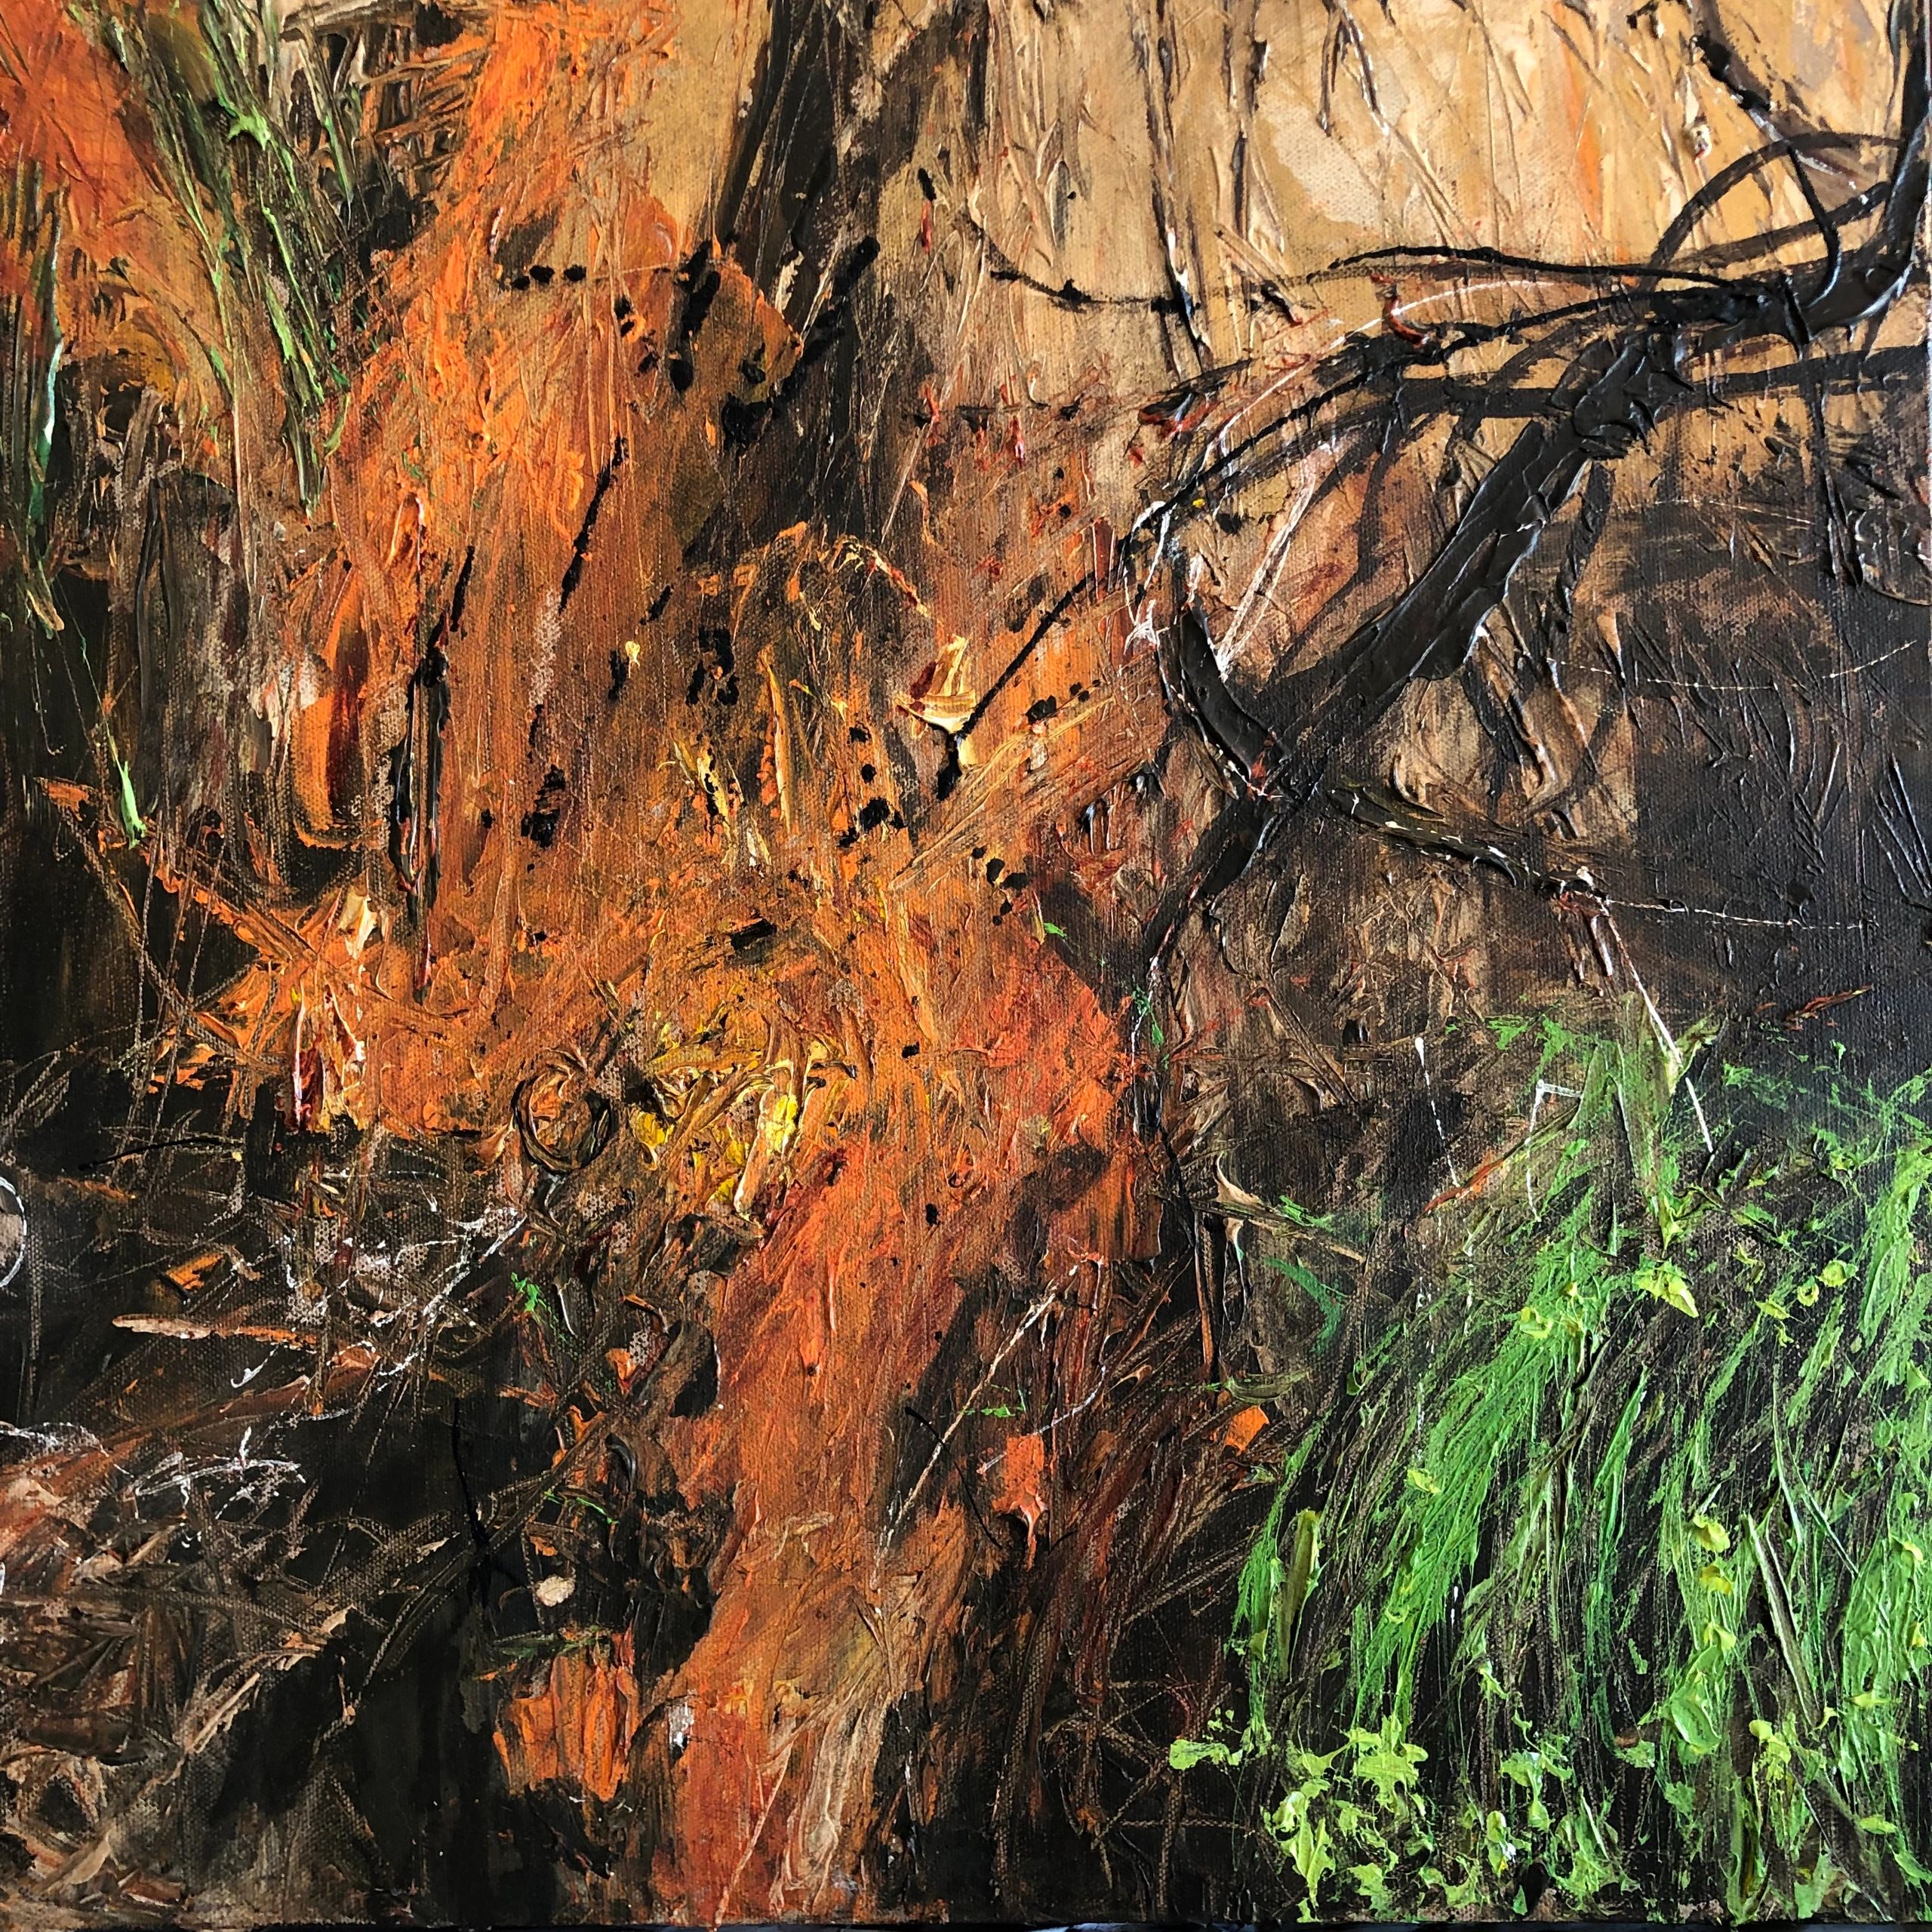 Original abstract artwork primarily in shades of orange and brown with green